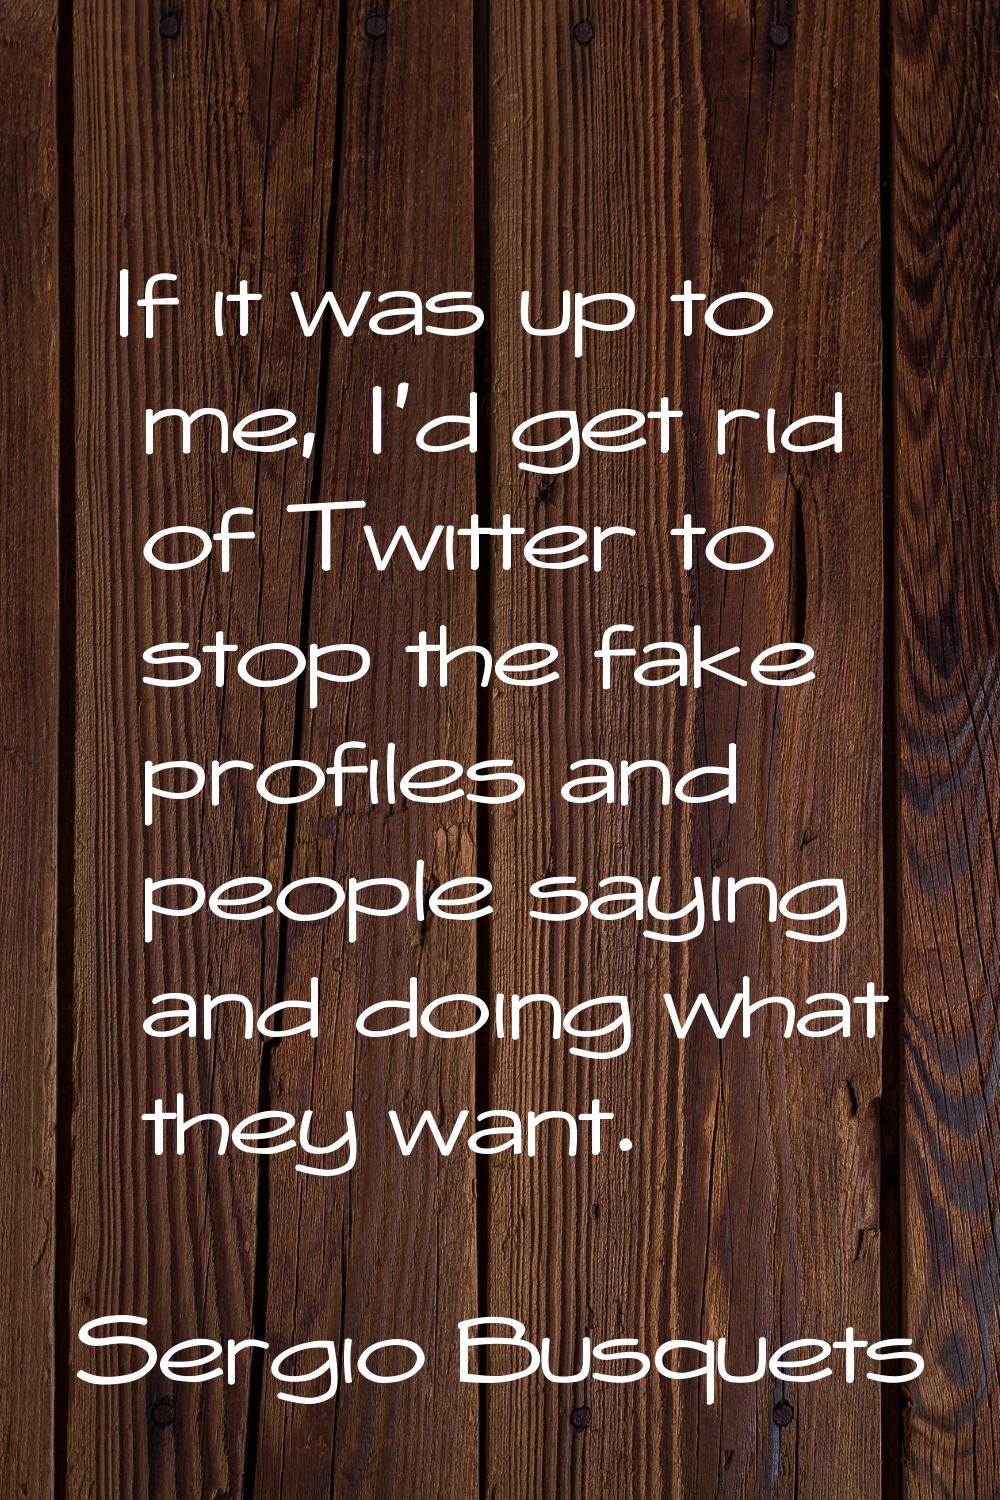 If it was up to me, I'd get rid of Twitter to stop the fake profiles and people saying and doing wh